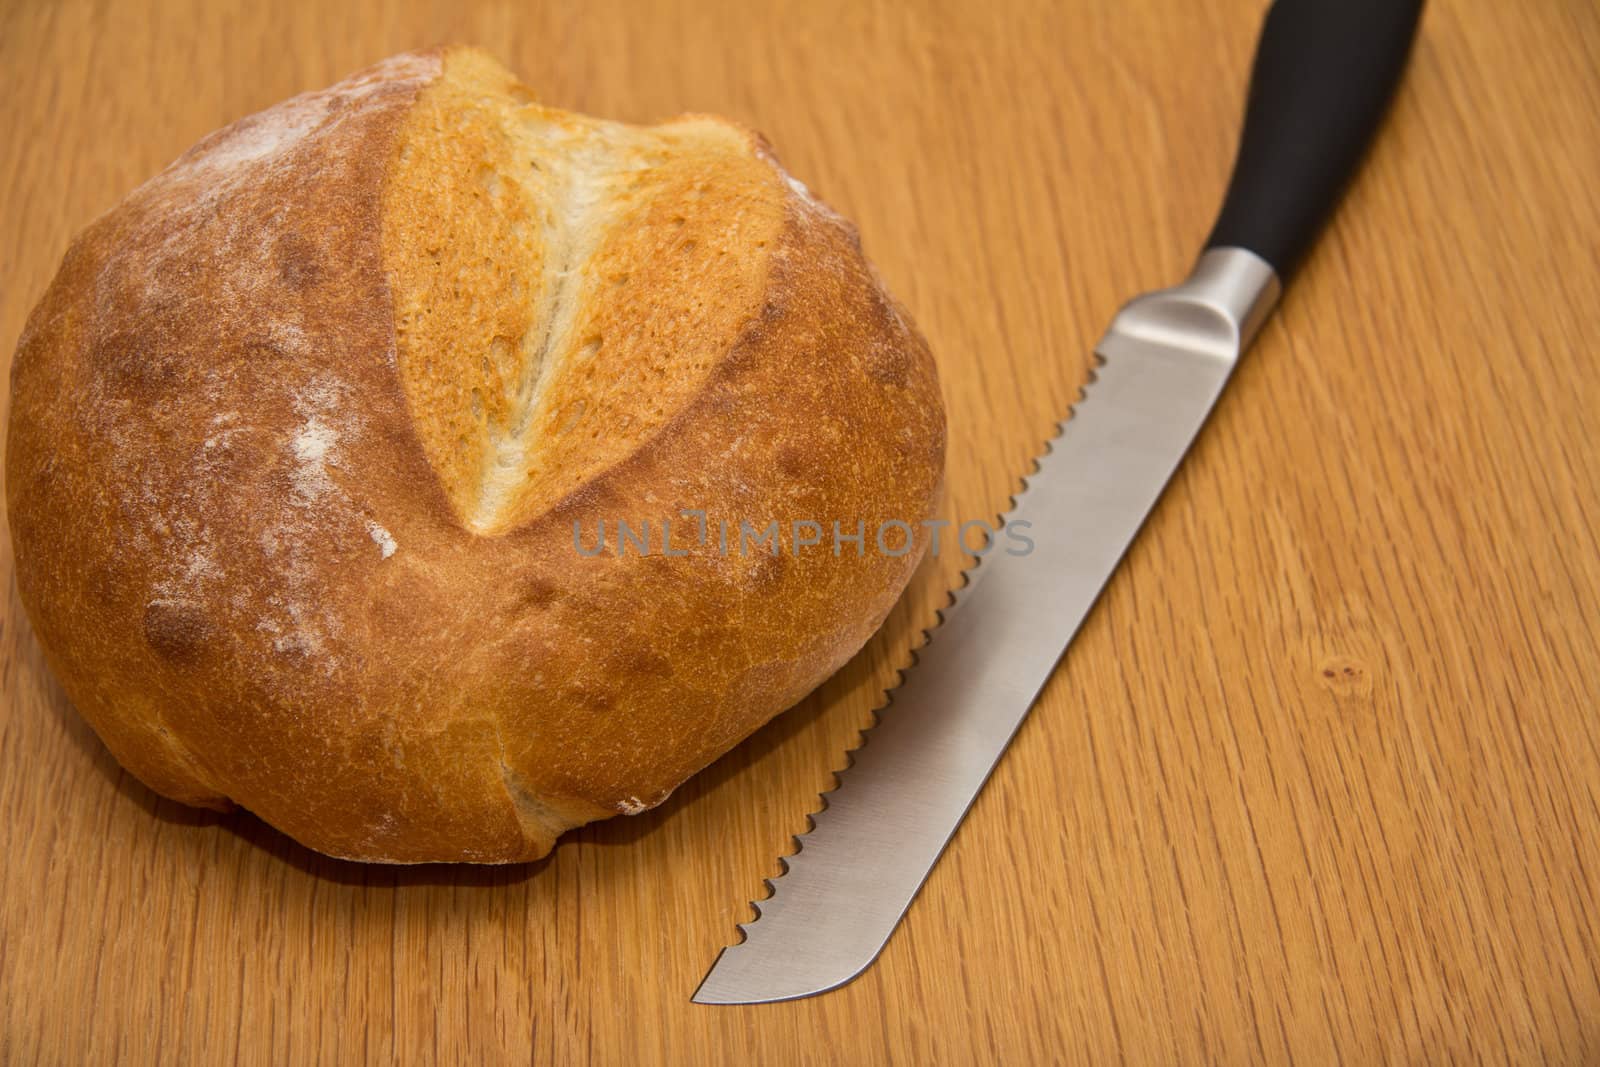 A loaf of fresh bread and a knife